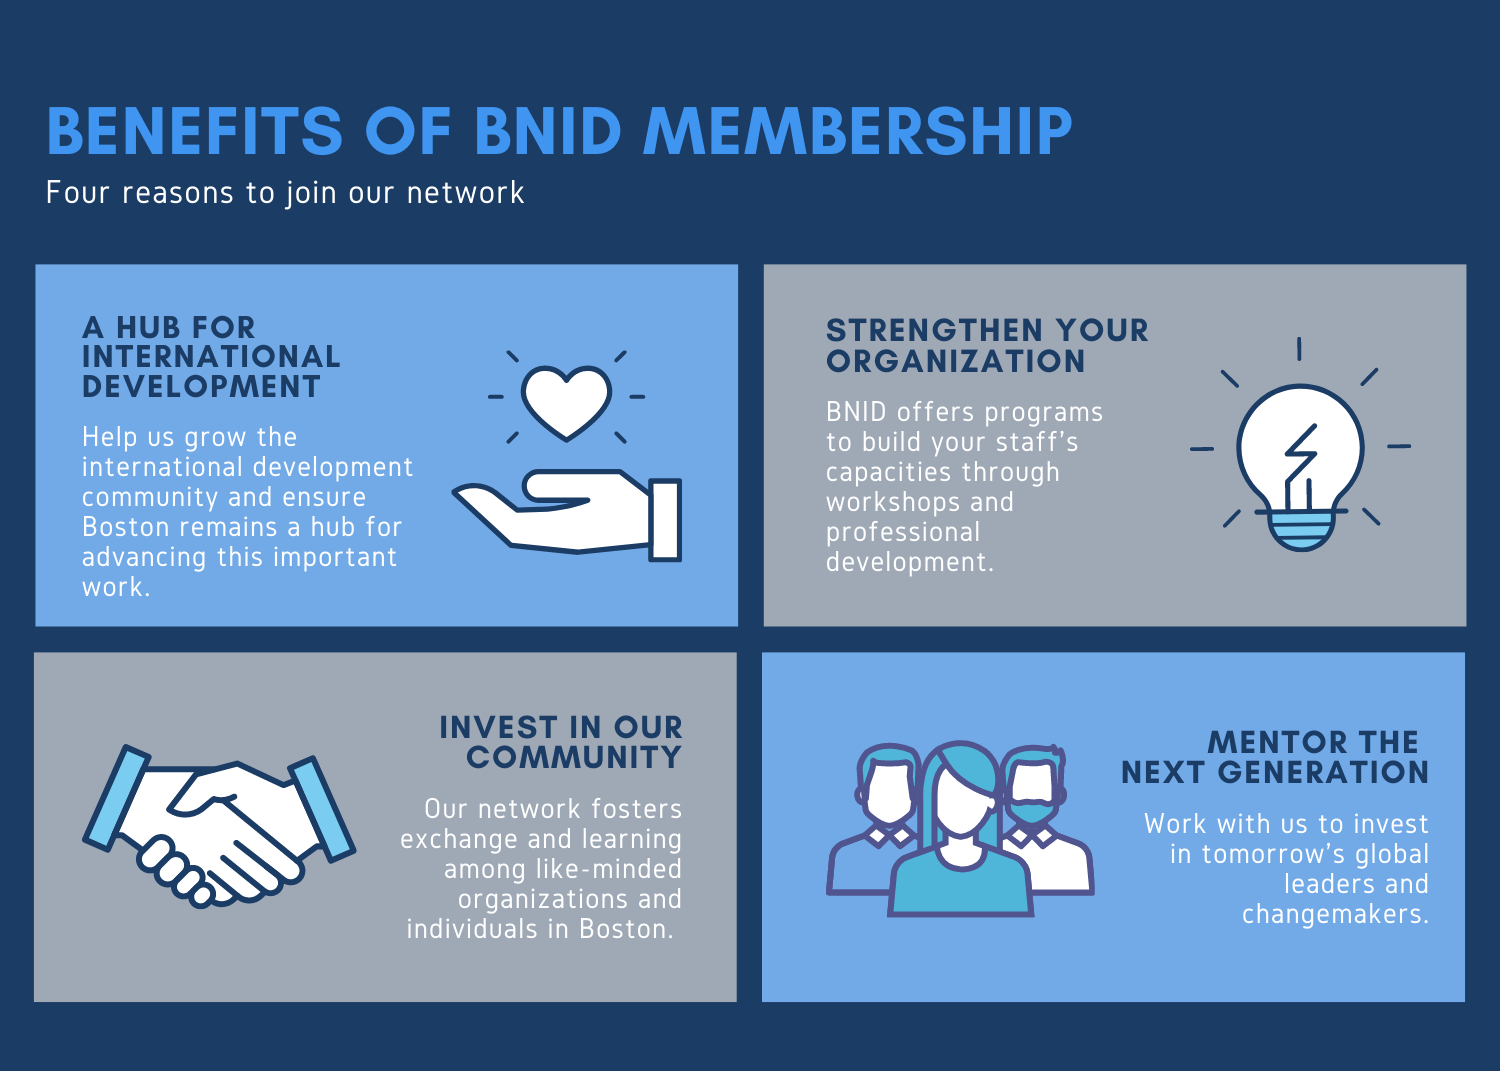 Benefits of BNID Membership - Four reasons to join our network: (1) A hub for international development; (2) Strengthen your organization; (3) Invest in our community; (4) Mentor the next generation